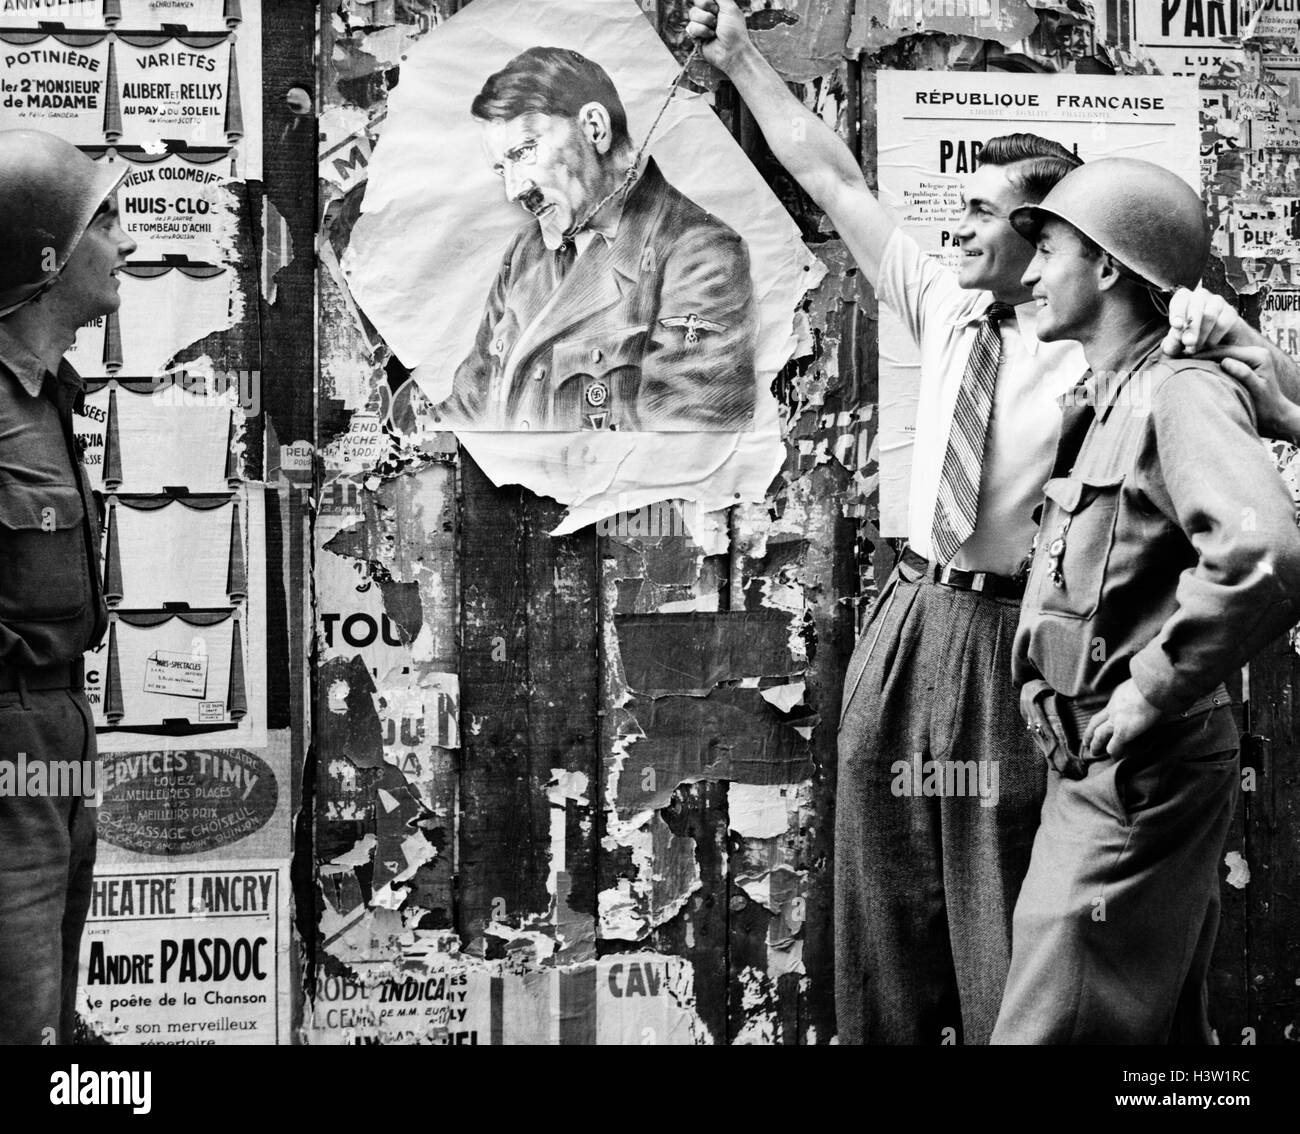 1940s CIVILIAN MAN SYMBOLICALLY HANGING ADOLF HITLER AS TWO YANK SOLDIERS LOOK ON AUGUST 26 1944 IN LATIN QUARTER PARIS FRANCE Stock Photo